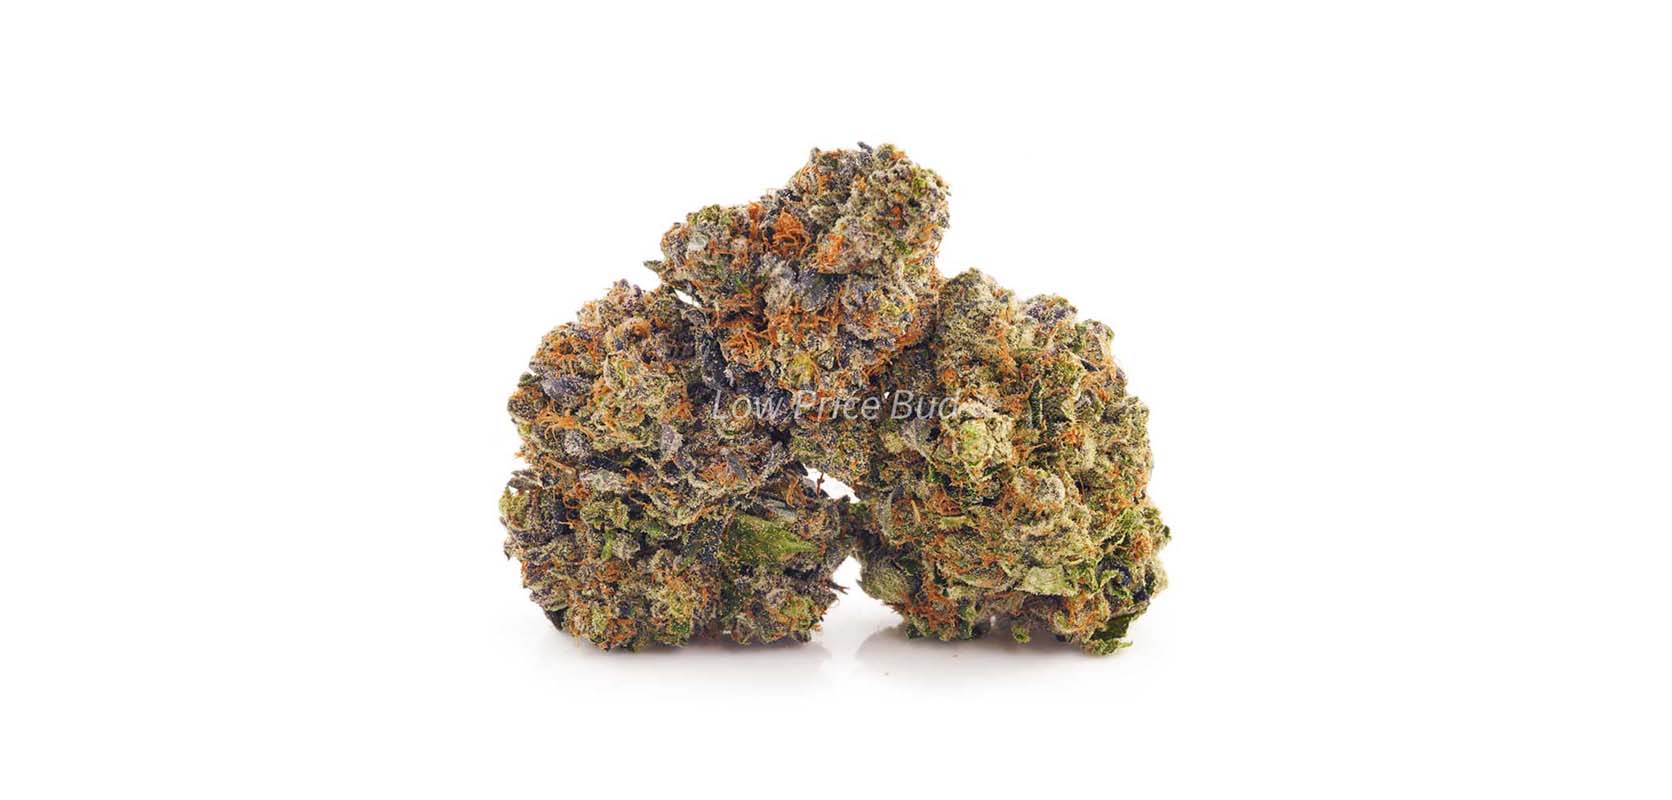 Pink Death Star weed online Canada. One of the best indica strains when buying weed online from a weed dispensary.